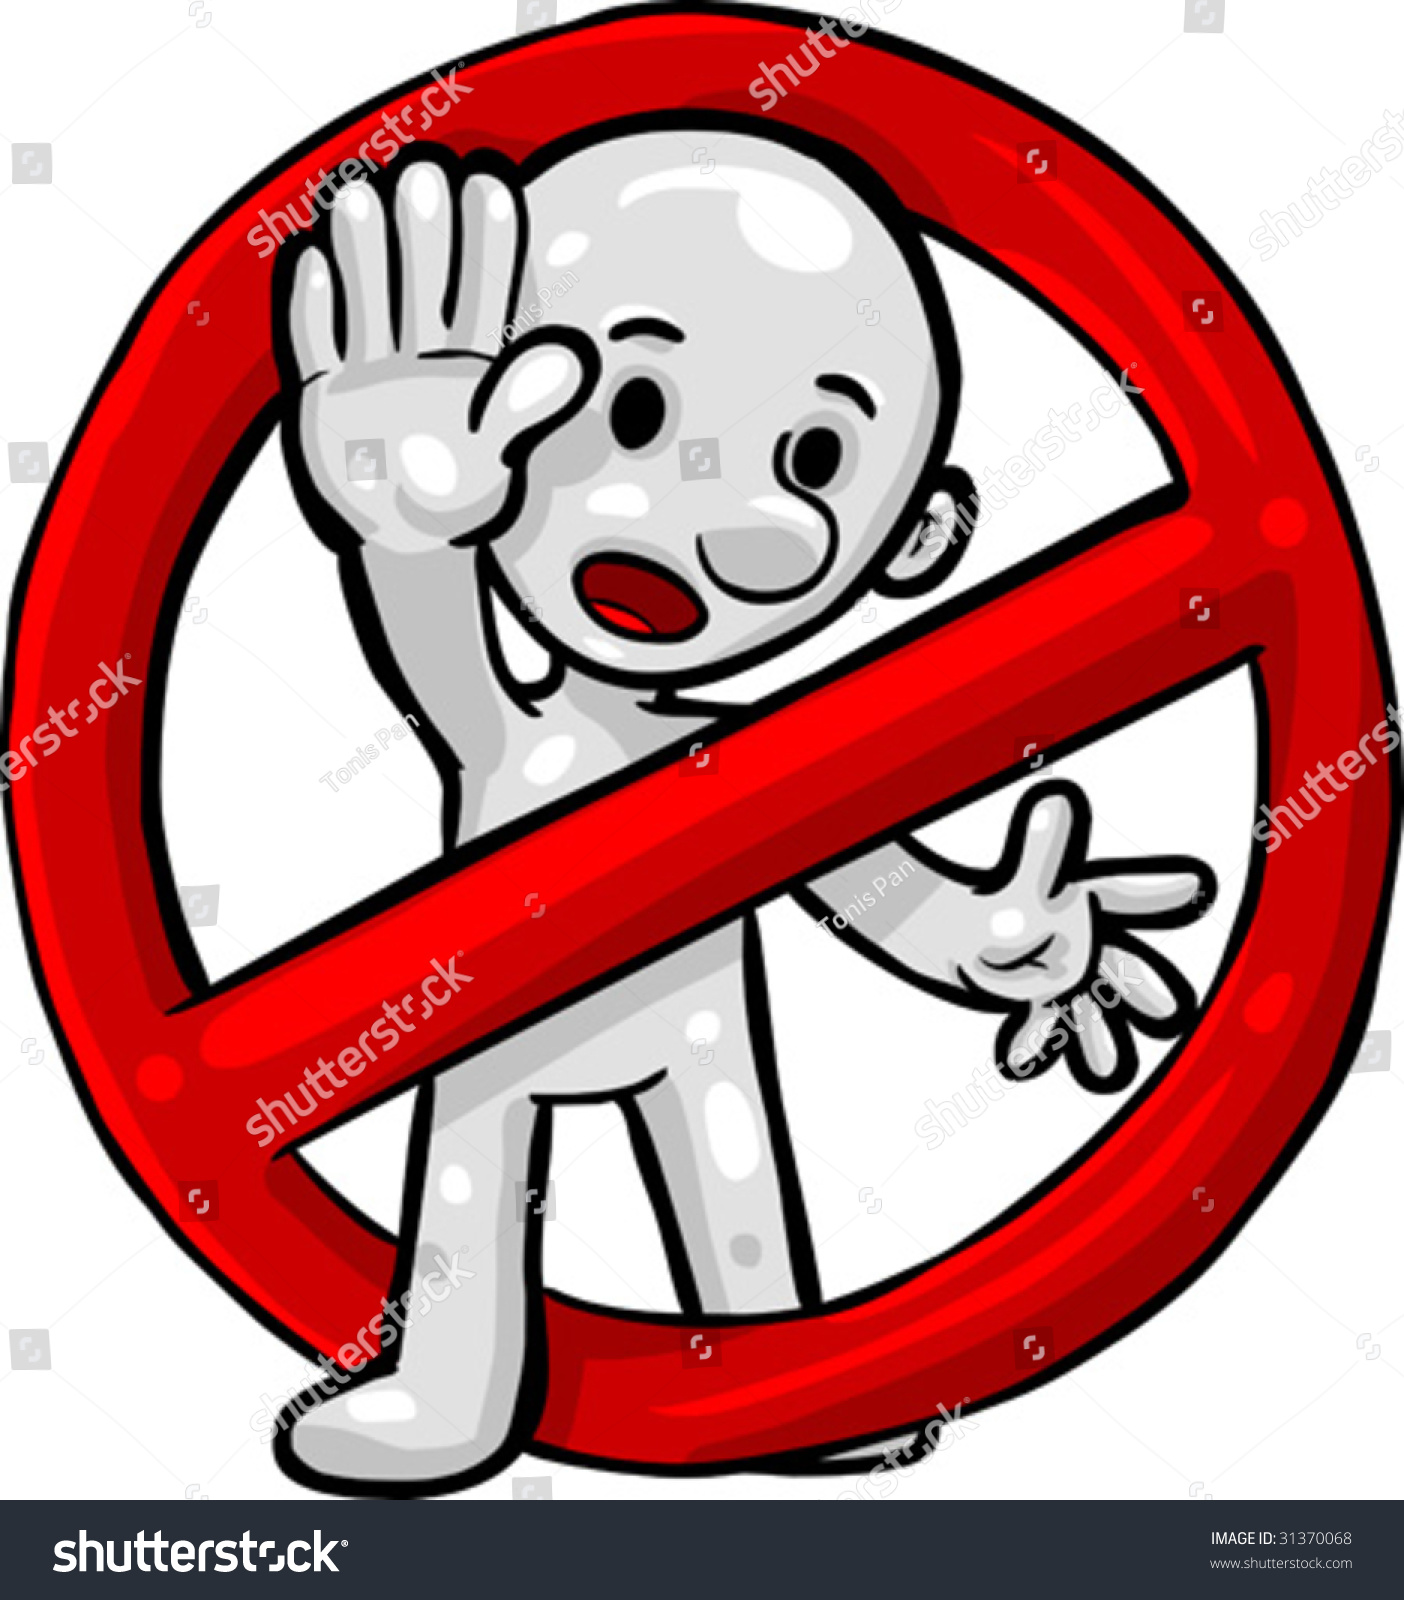 clipart images not showing - photo #9